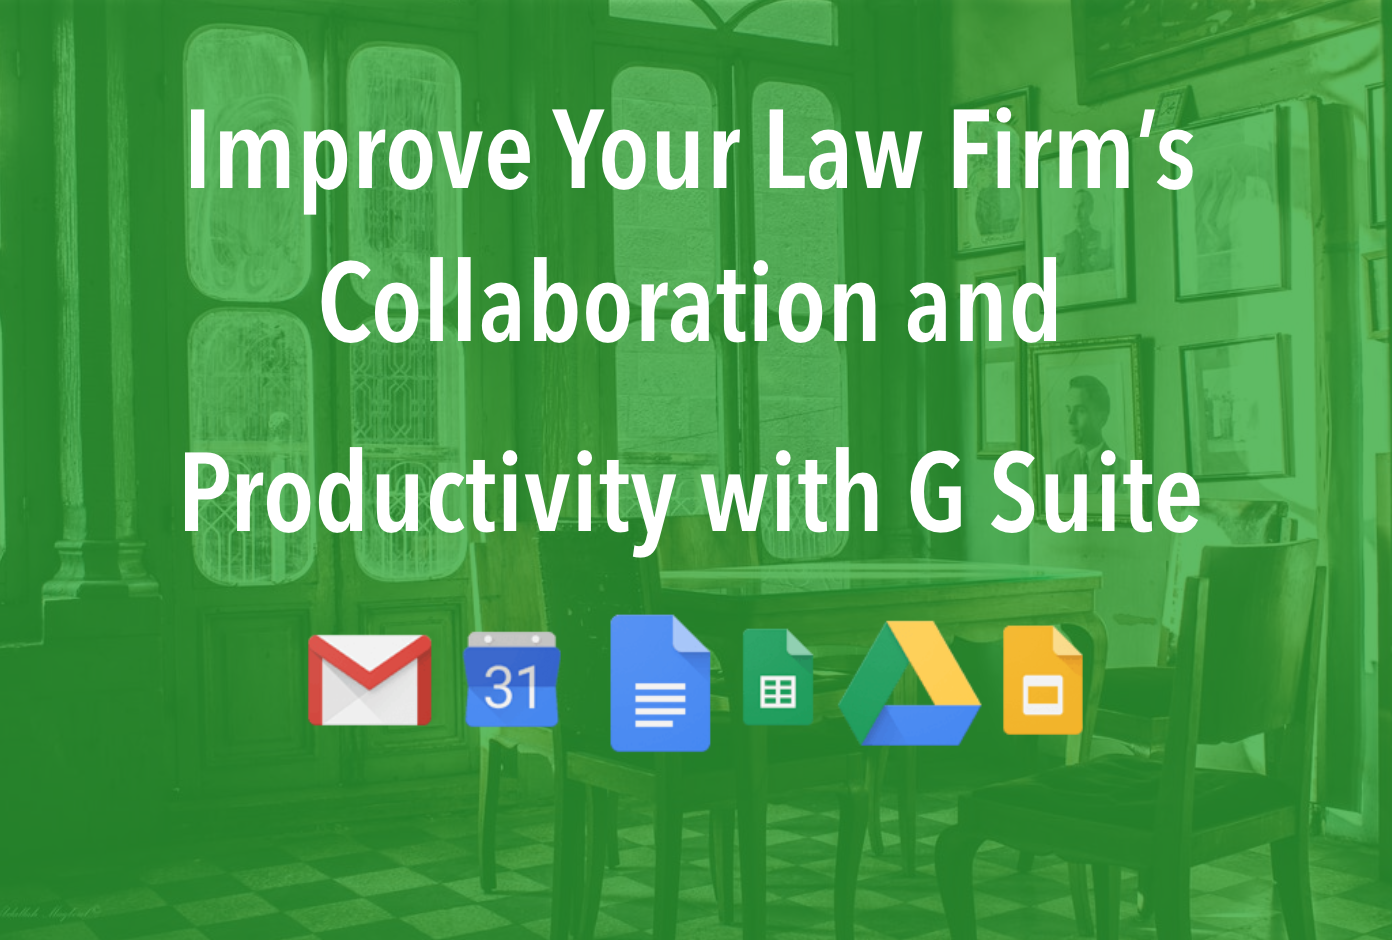 Improve Law Firm Collaboration and Productivity with G Suite